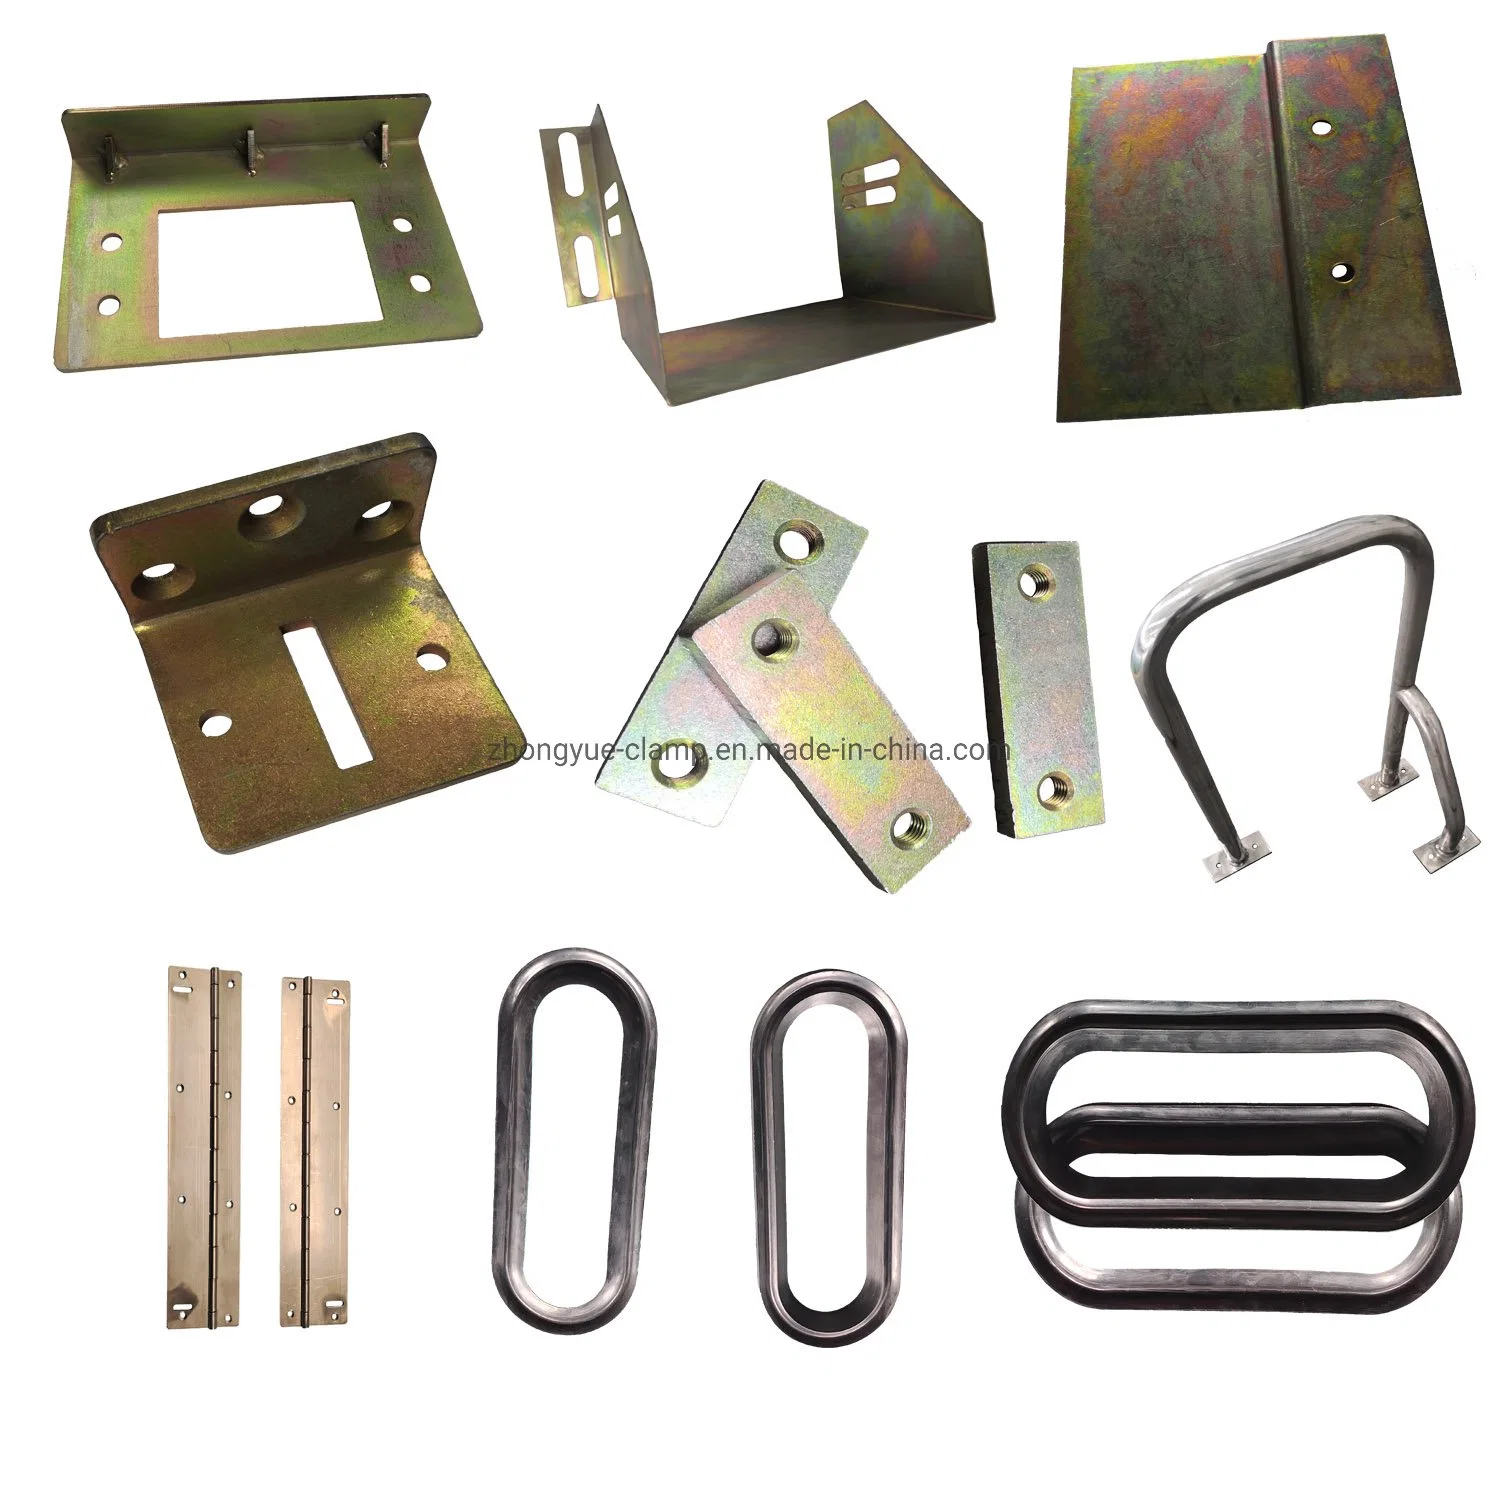 Customized E-Coating Surface Treatment Steel Metal Hardware Stamping Parts for Industry